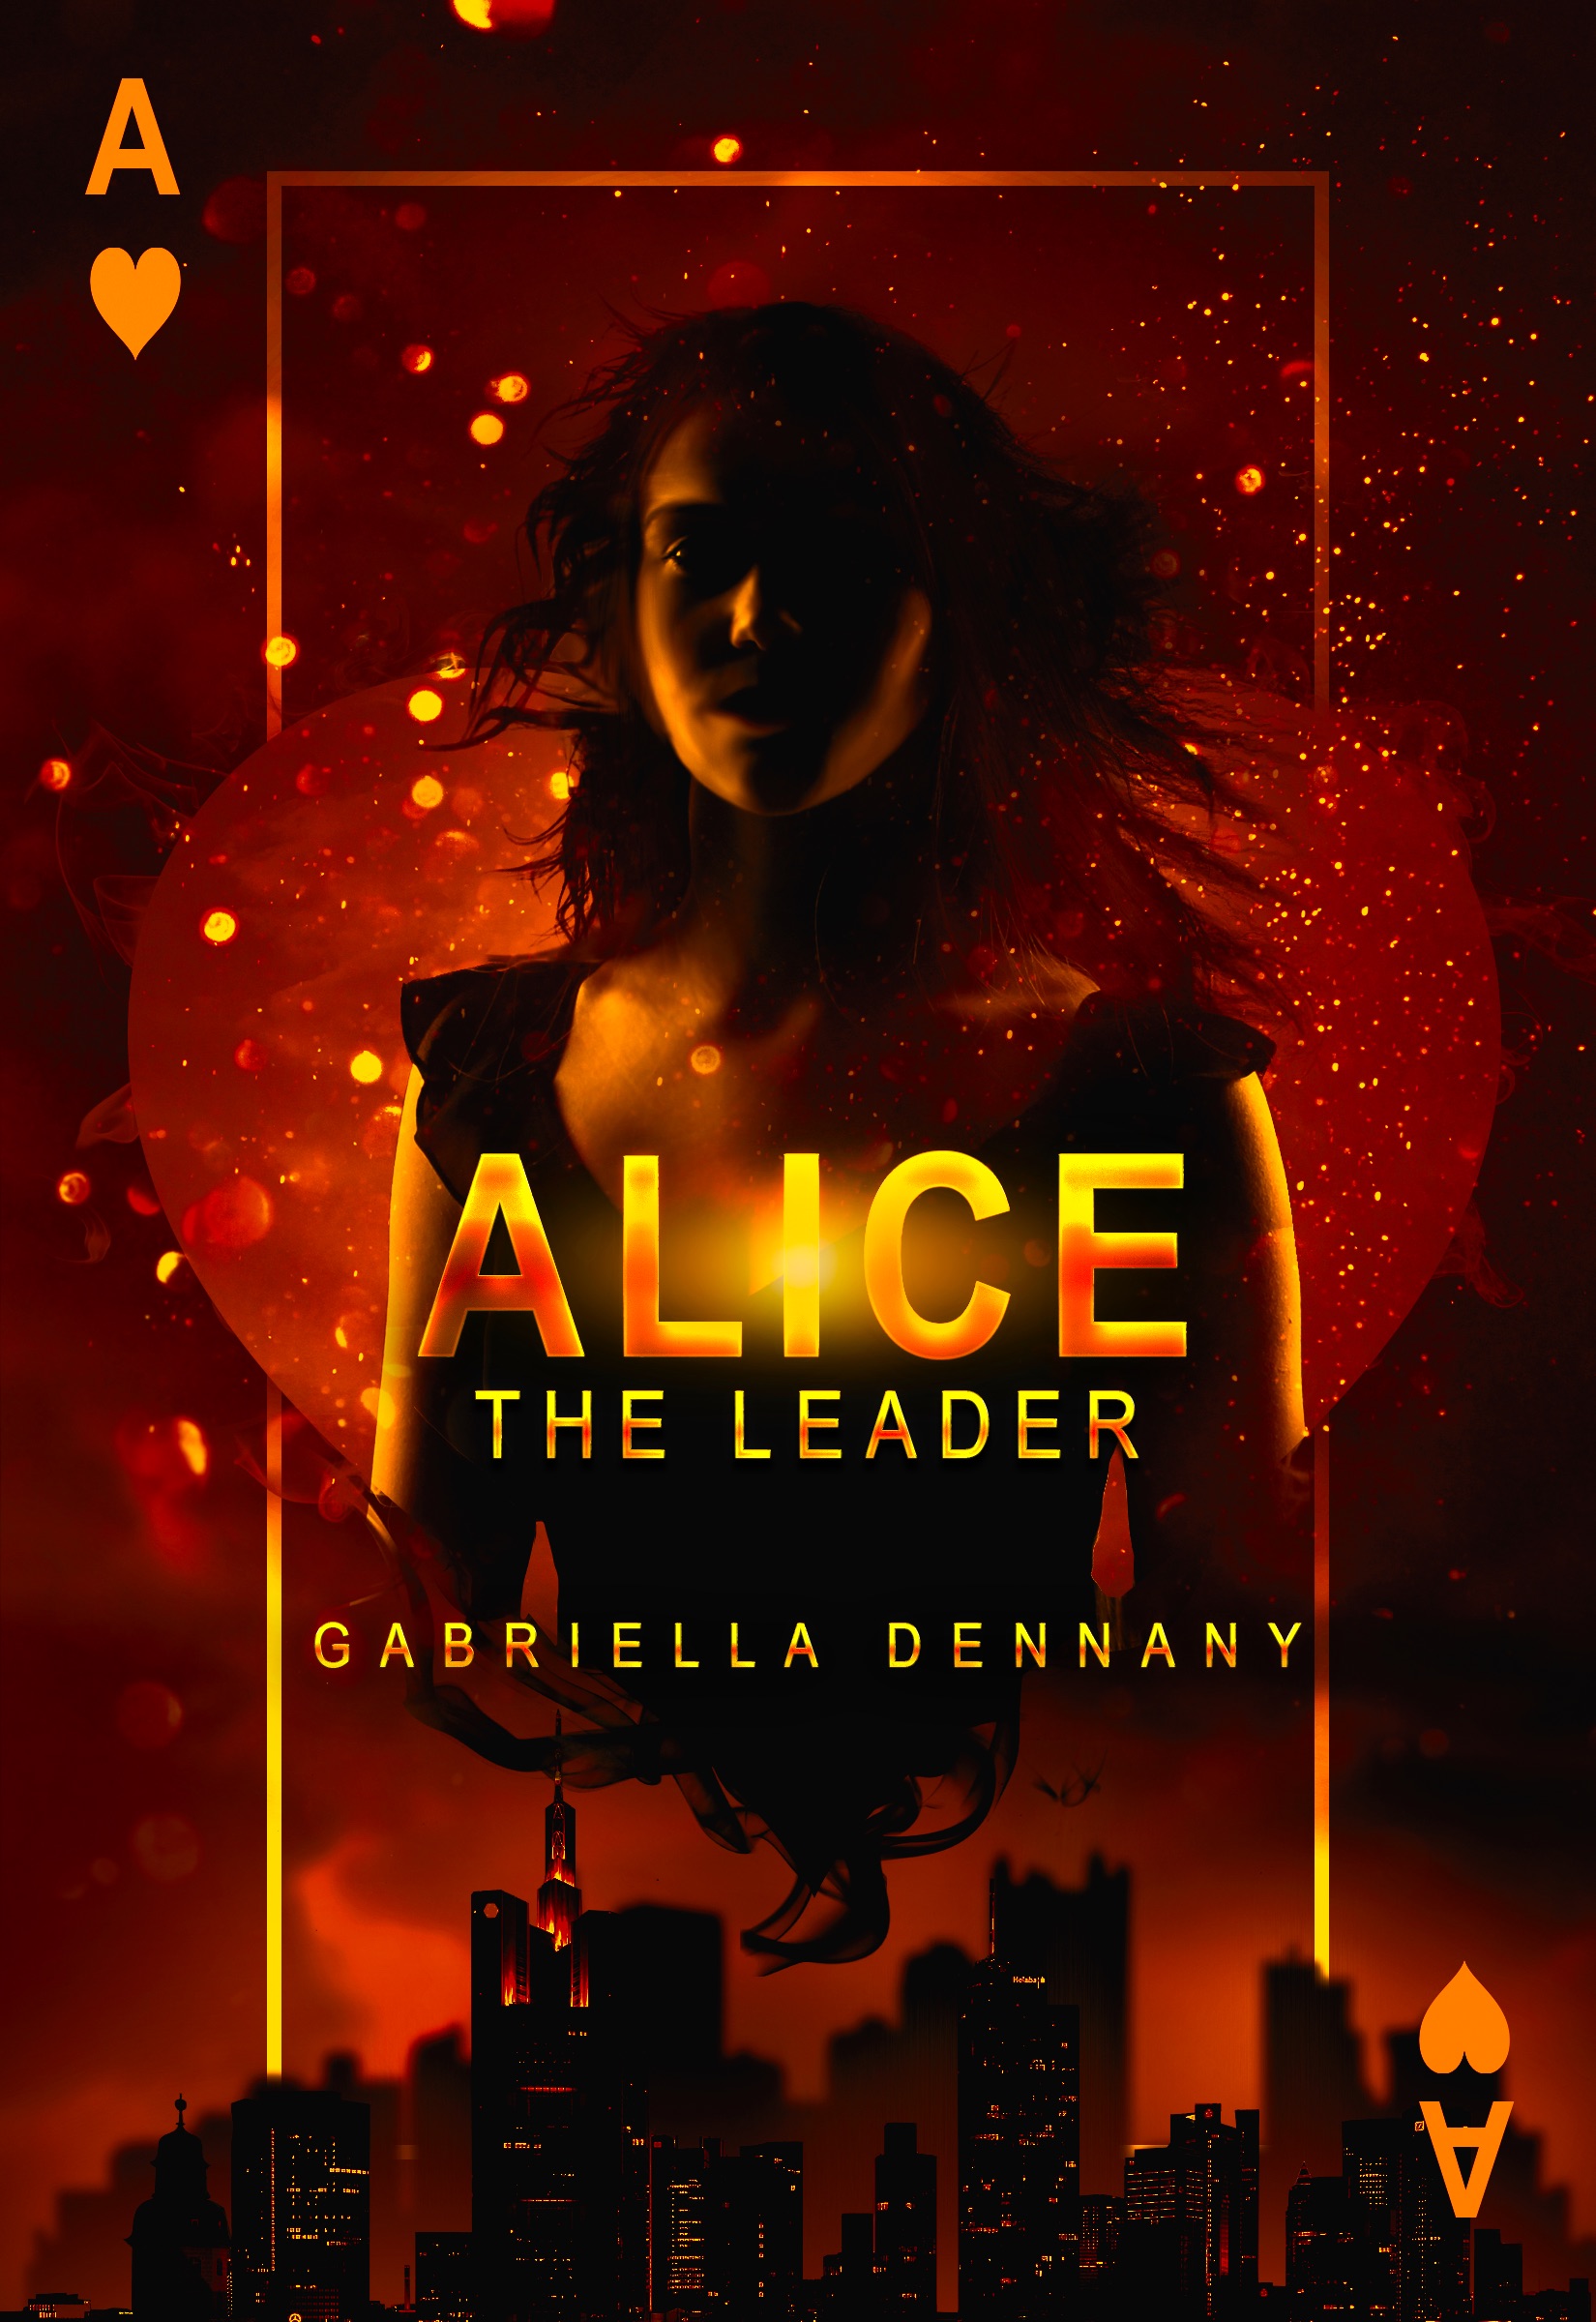 ALICE: THE LEADER